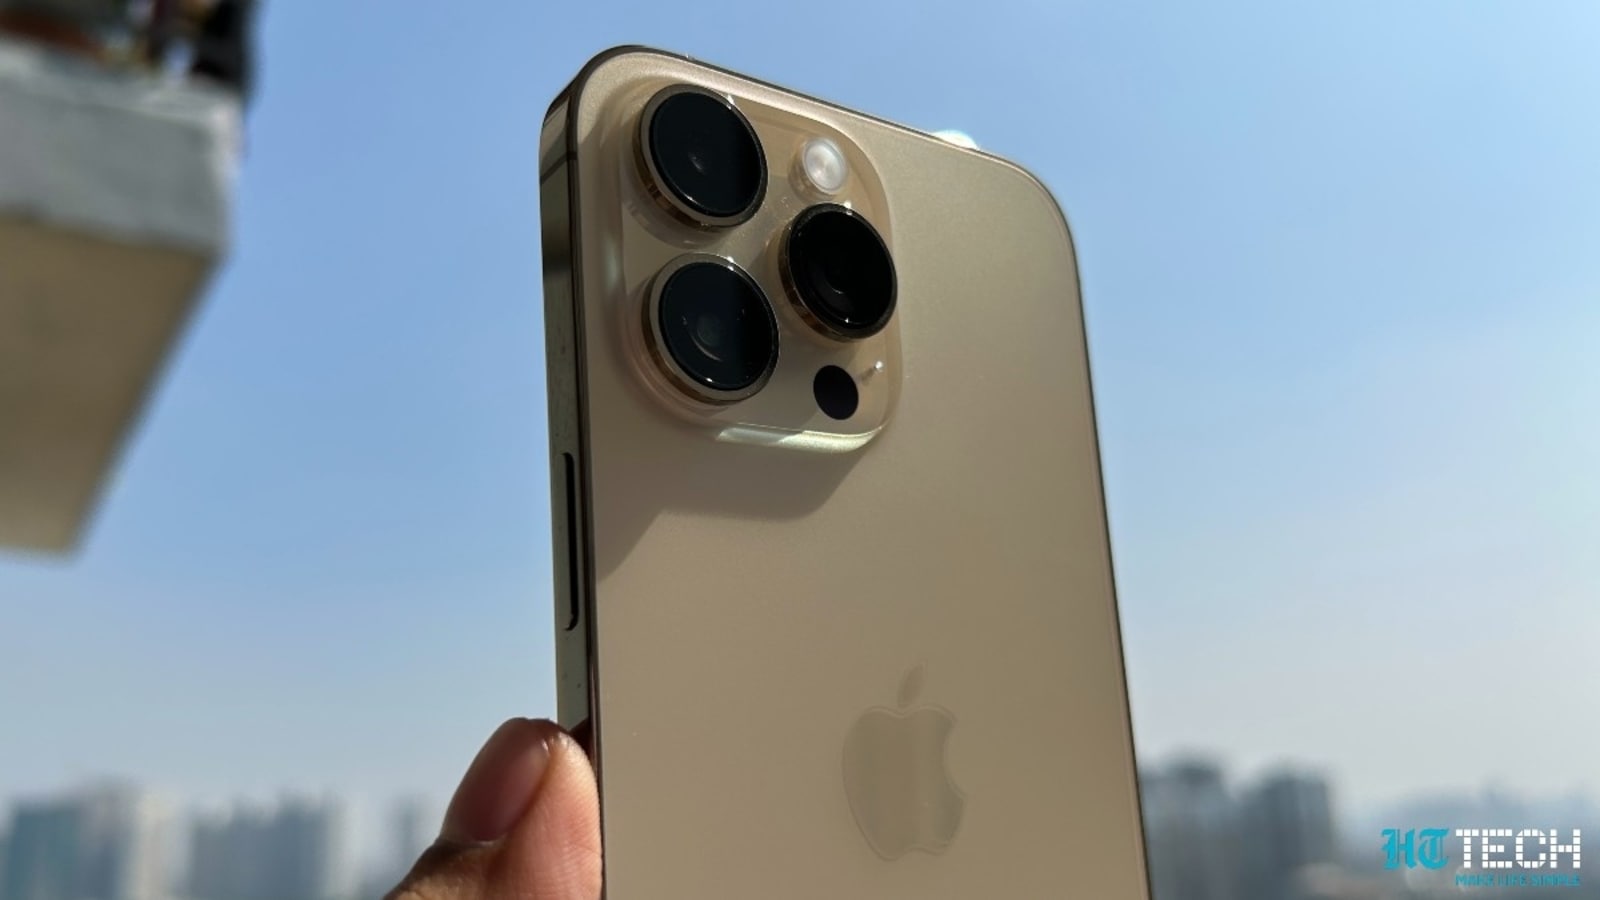 Where to buy the iPhone 11 and iPhone 11 Pro